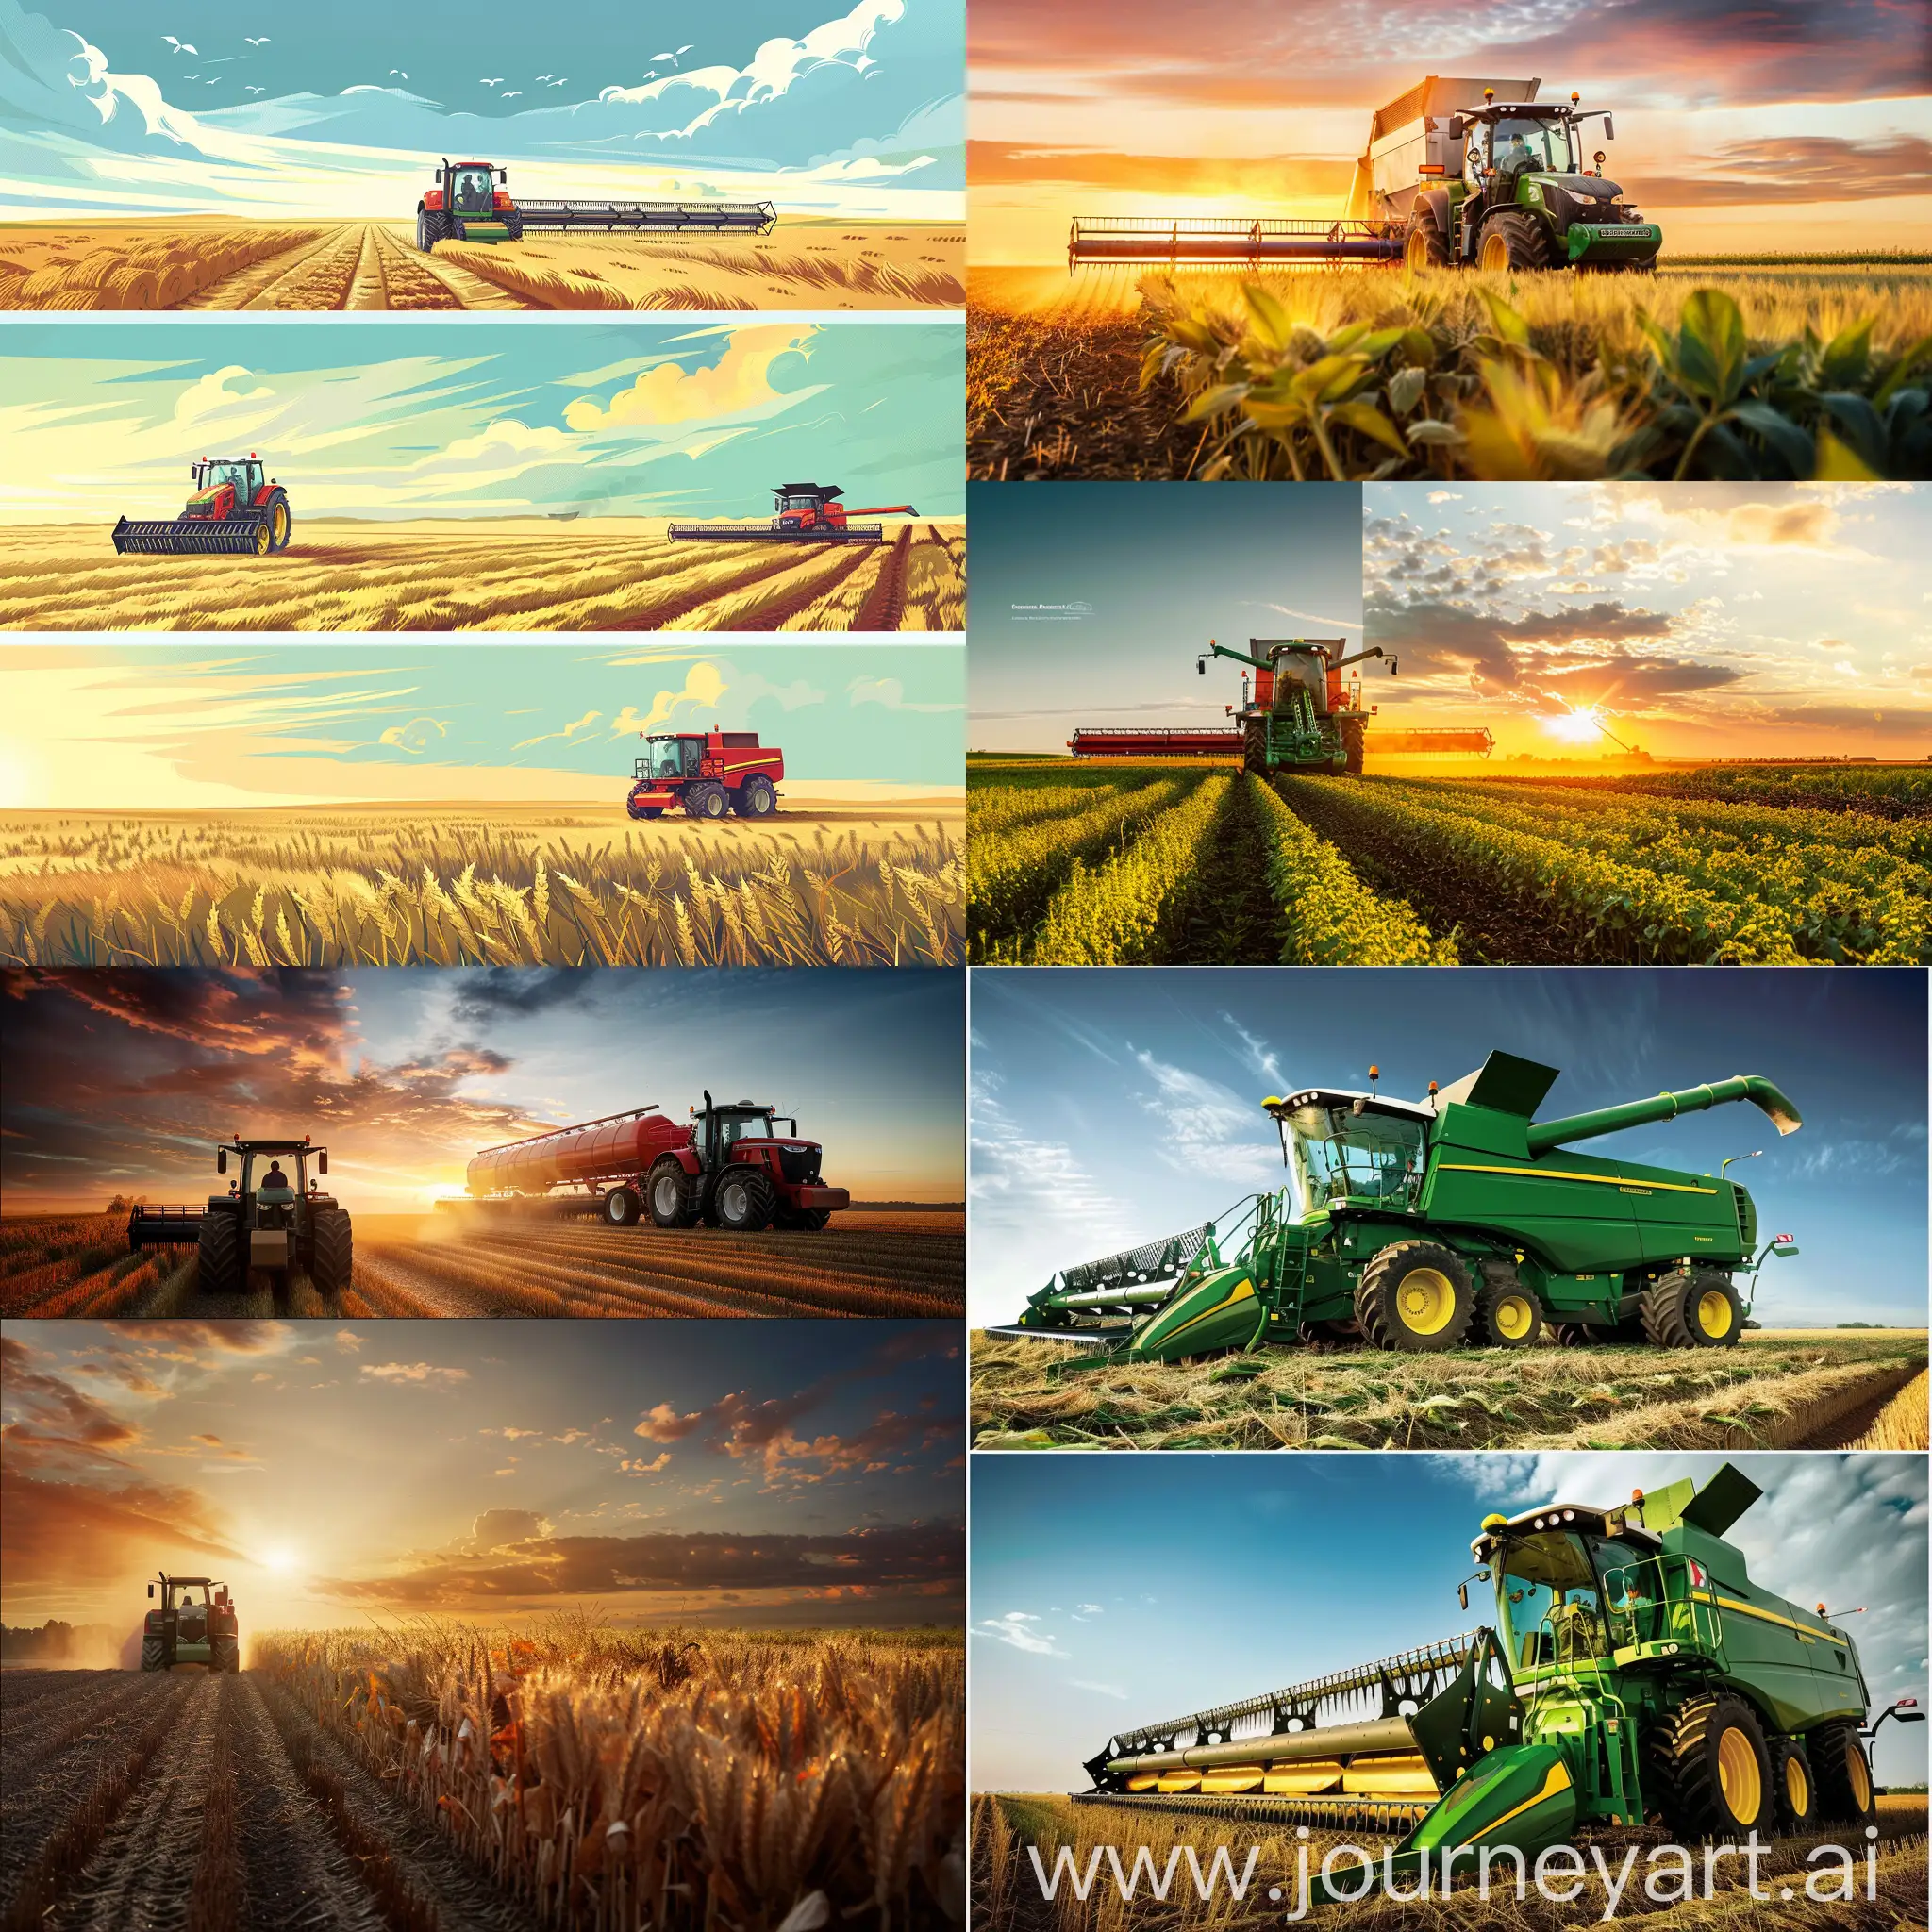 I want 3 images for an agricultural website. The images needs to reflect that the company is big and the images should be landscape